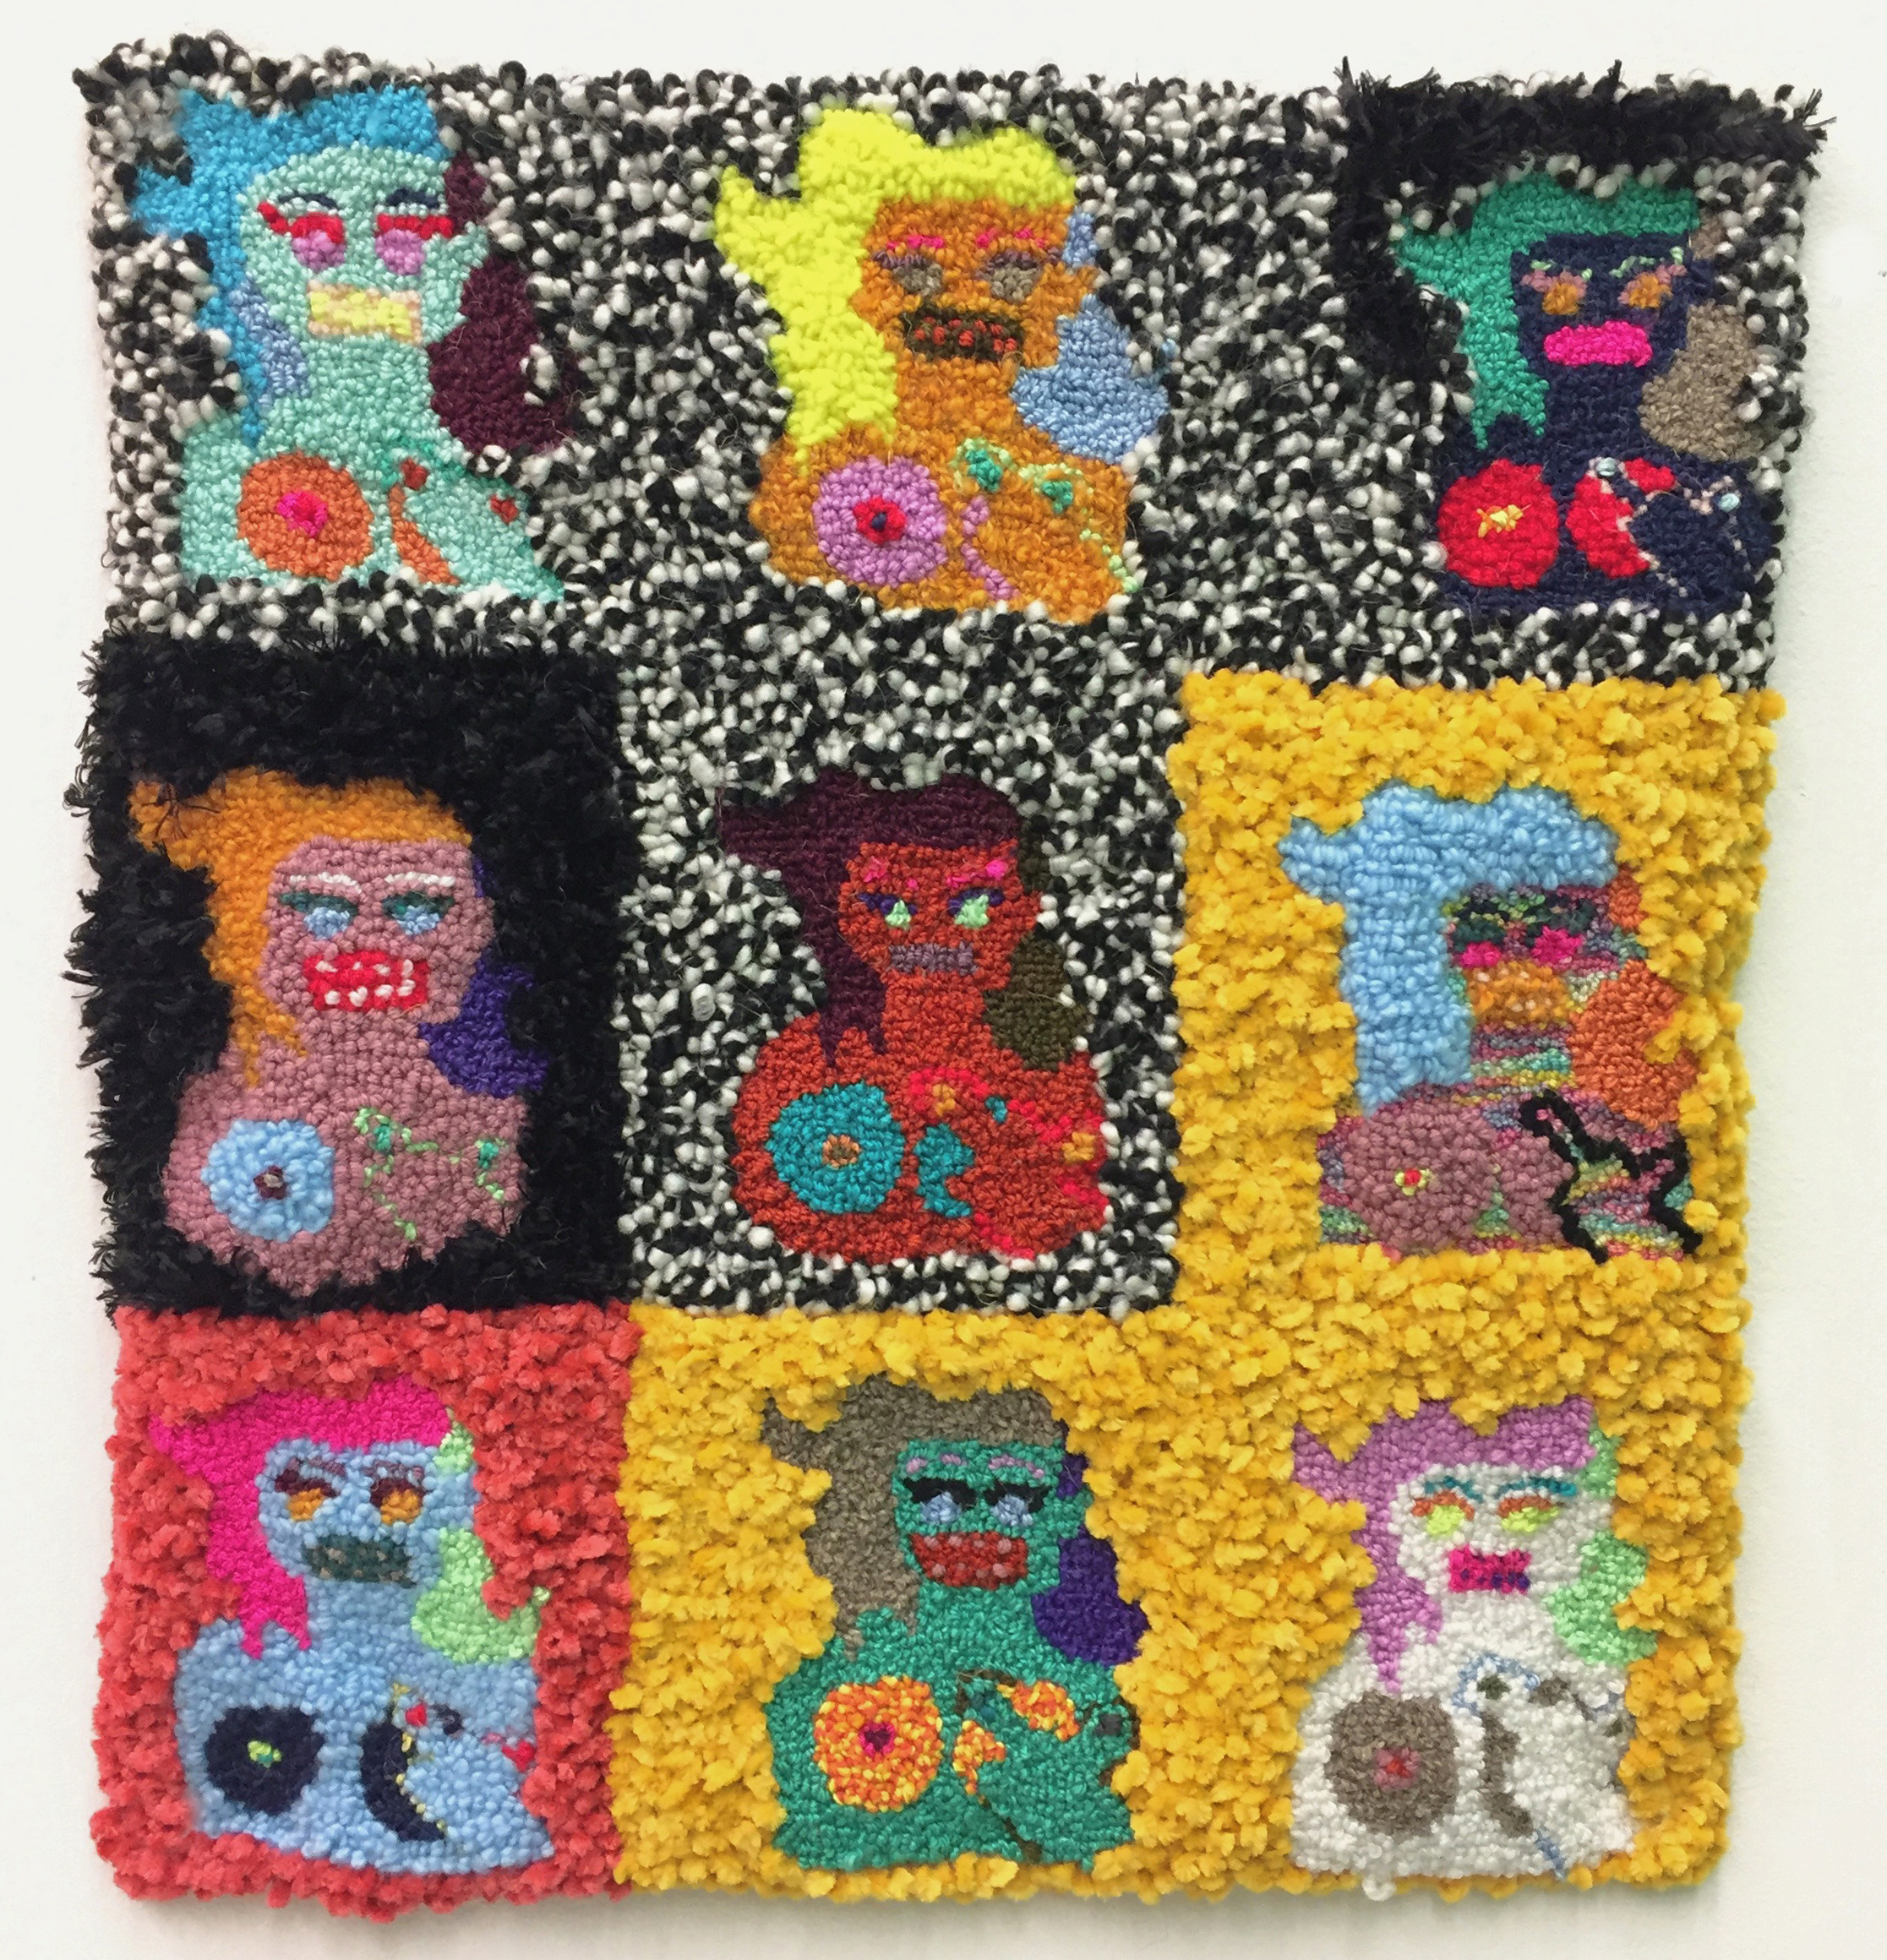 Hannah Epstein. <em>9 Ahngry Babes</em>, 2017. Wool, acrylic and burlap, 18 x 18 inches (45.7 x 45.7 cm)